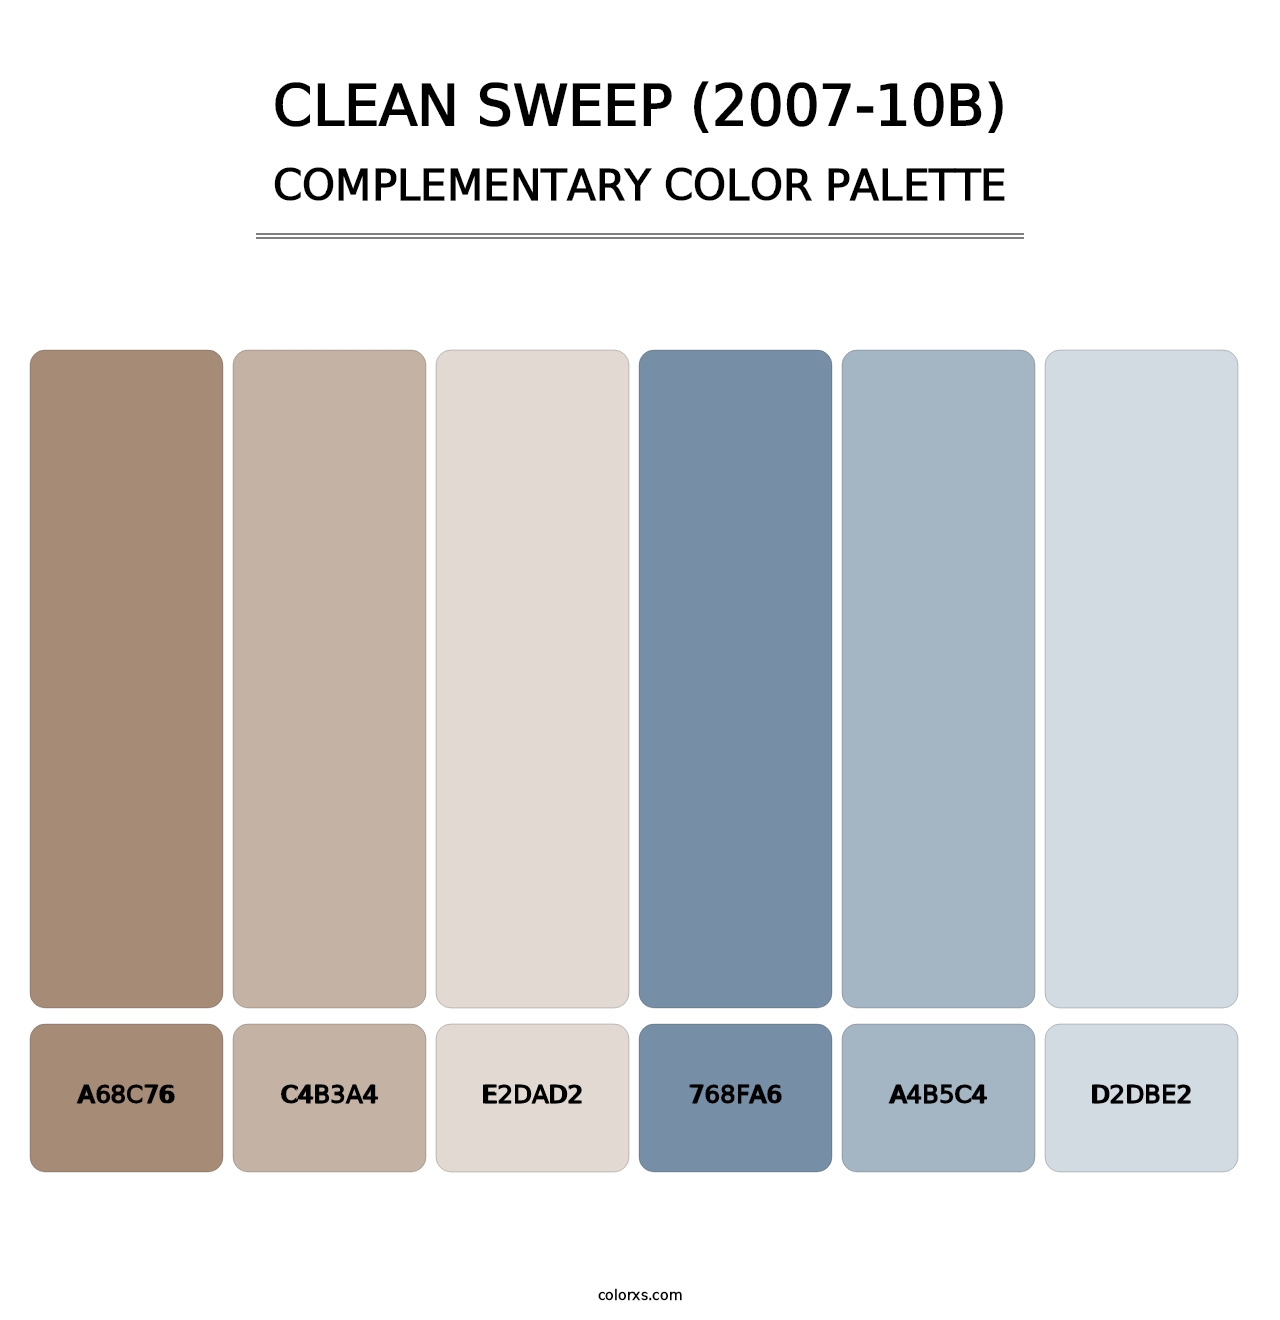 Clean Sweep (2007-10B) - Complementary Color Palette